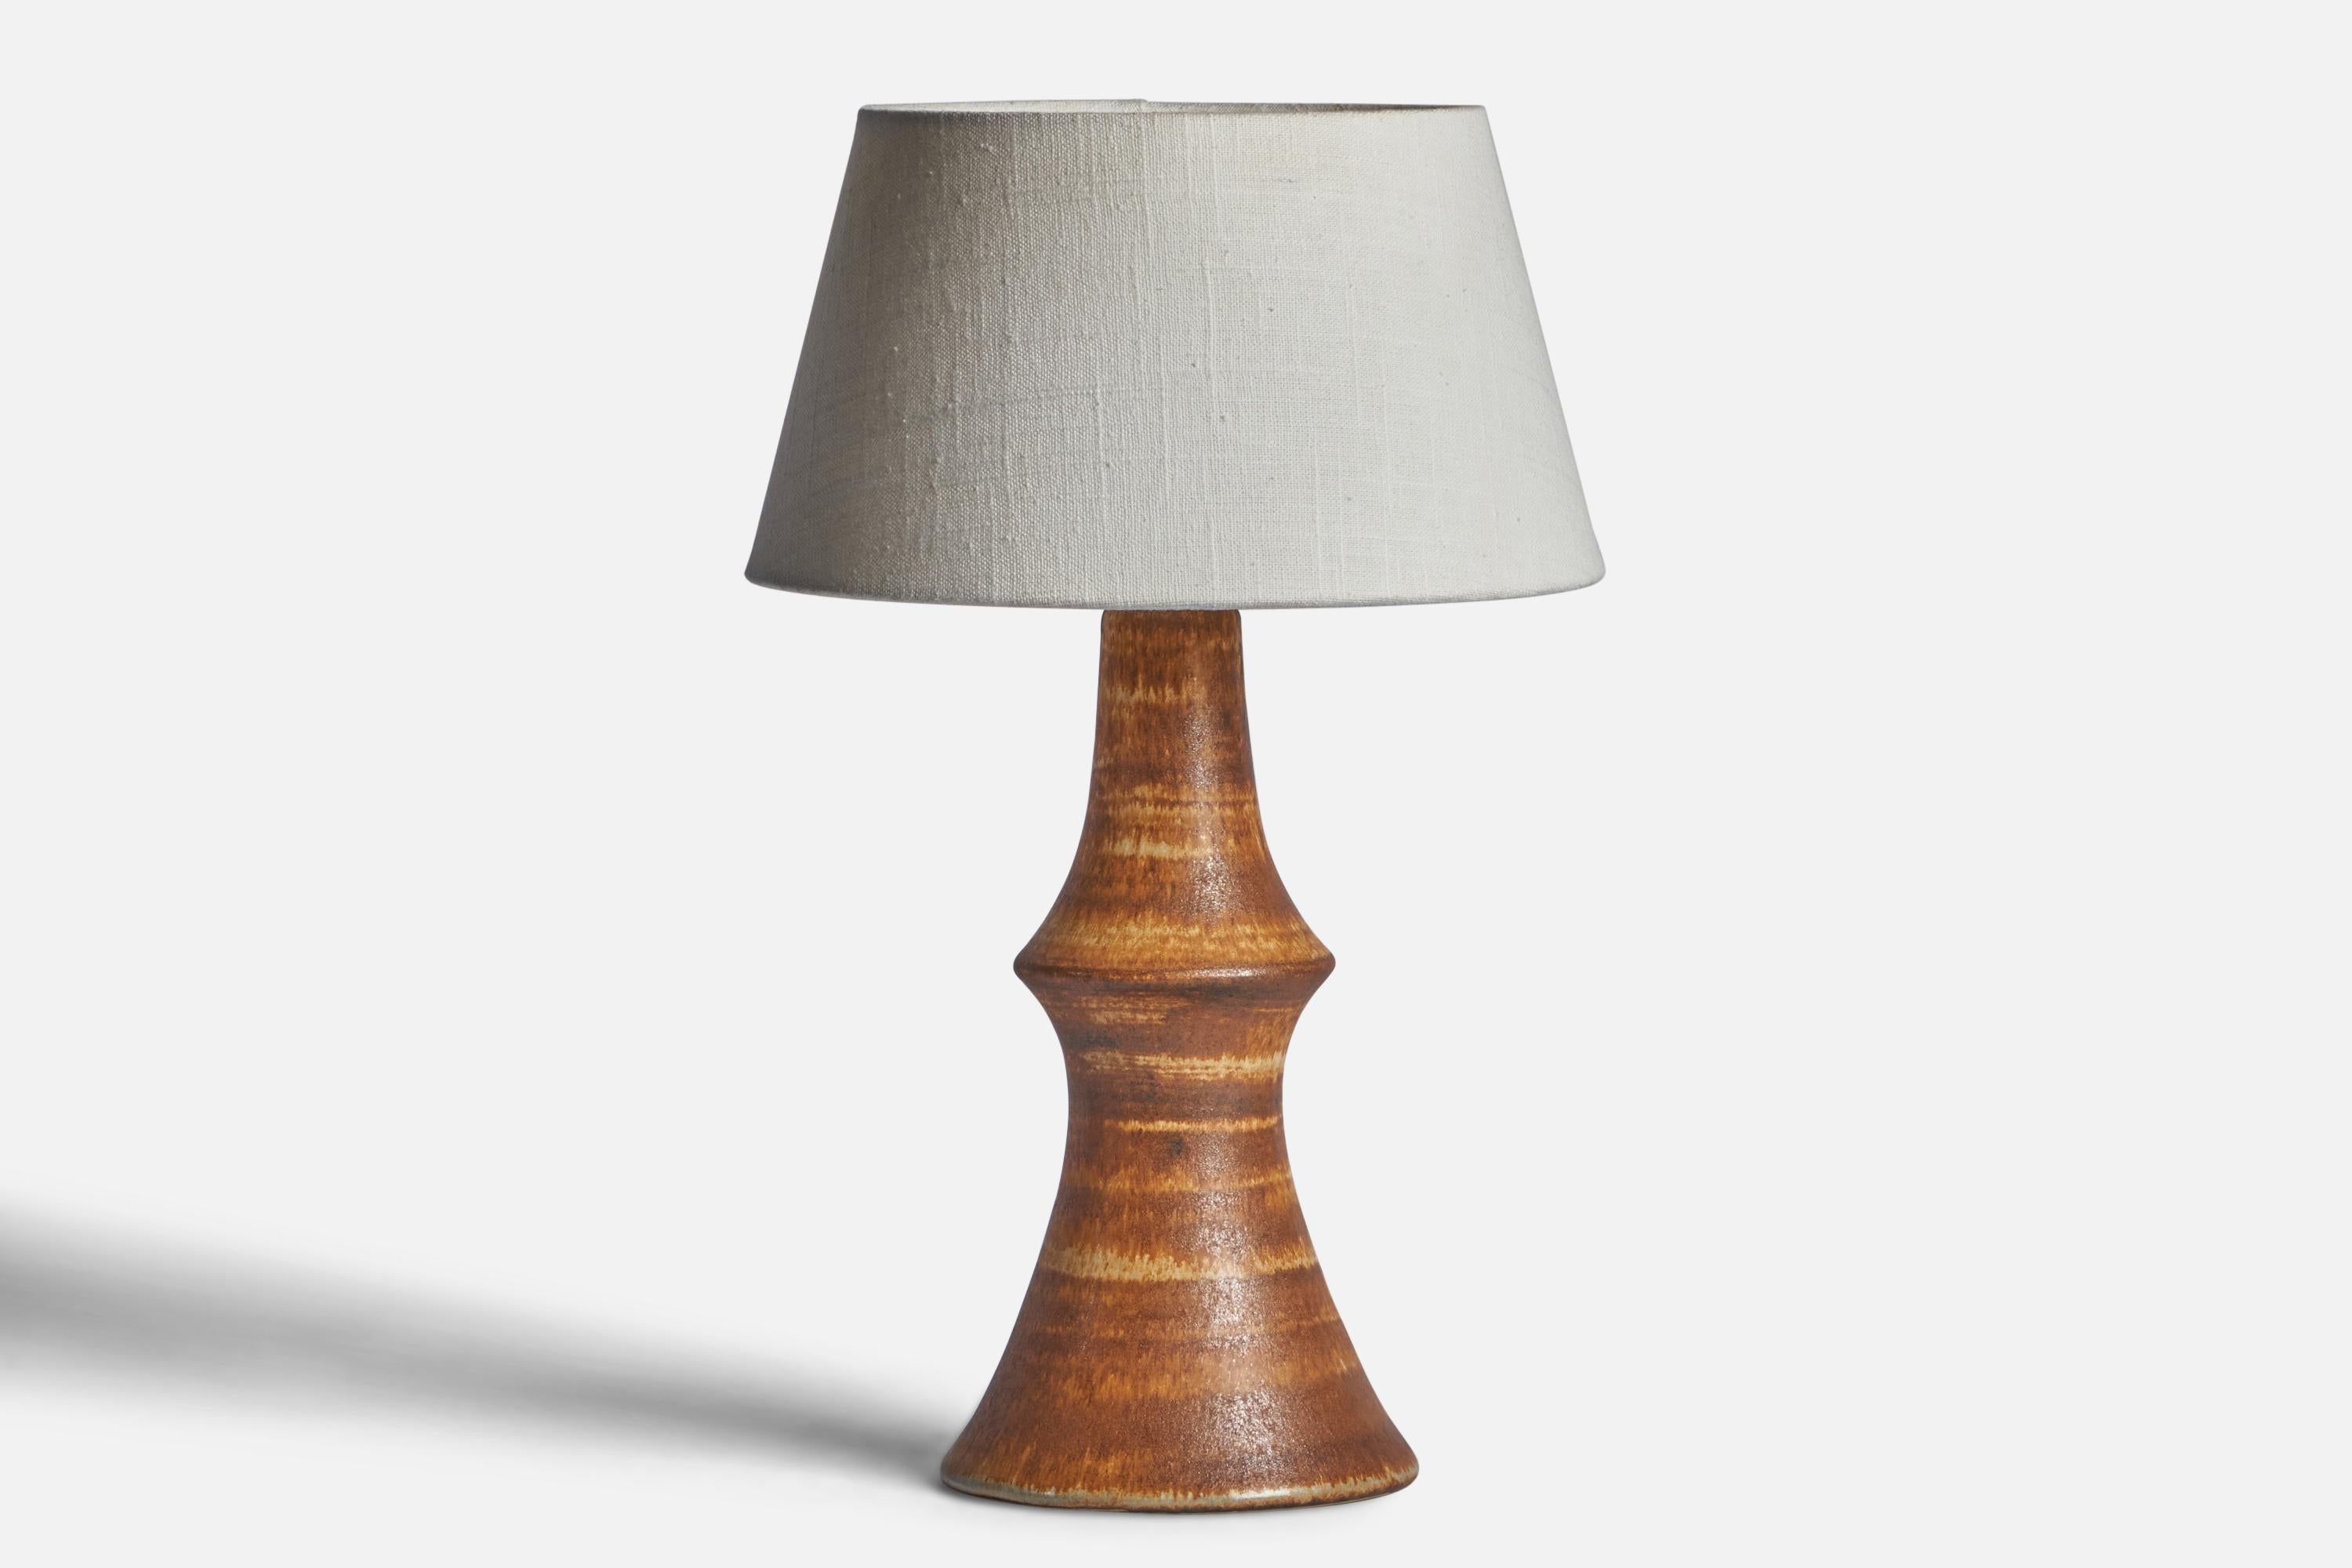 
A brown-glazed stoneware table lamp designed by Bruno Karlsson and produced by Ego Stengods, Sweden, 1960s.
Dimensions of Lamp (inches): 12.75” H x 5.65” Diameter
Dimensions of Shade (inches): 7” Top Diameter x 10” Bottom Diameter x 5.5” H